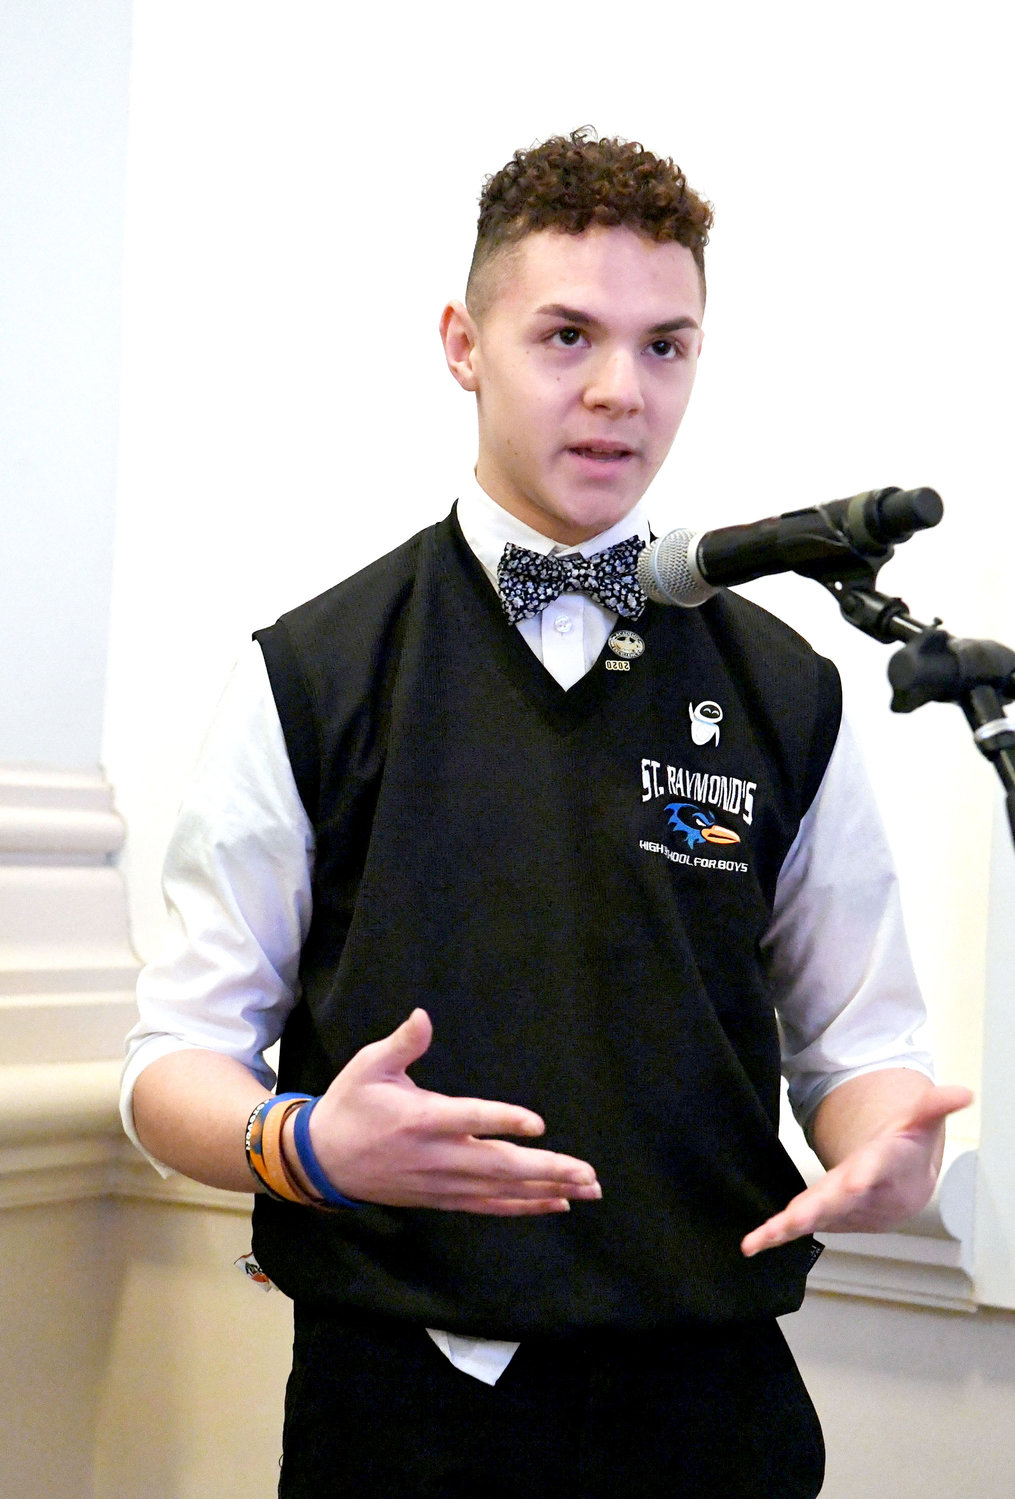 FUTURE-FOCUSED—Joeden Hernandez, a senior at St. Raymond High School for Boys in the Bronx, raises a question during the fourth annual Student Leadership Conference, “The Culture of Encounter: A Catholic Lens,” March 12 at the Sheen Center for Thought and Culture in lower Manhattan.